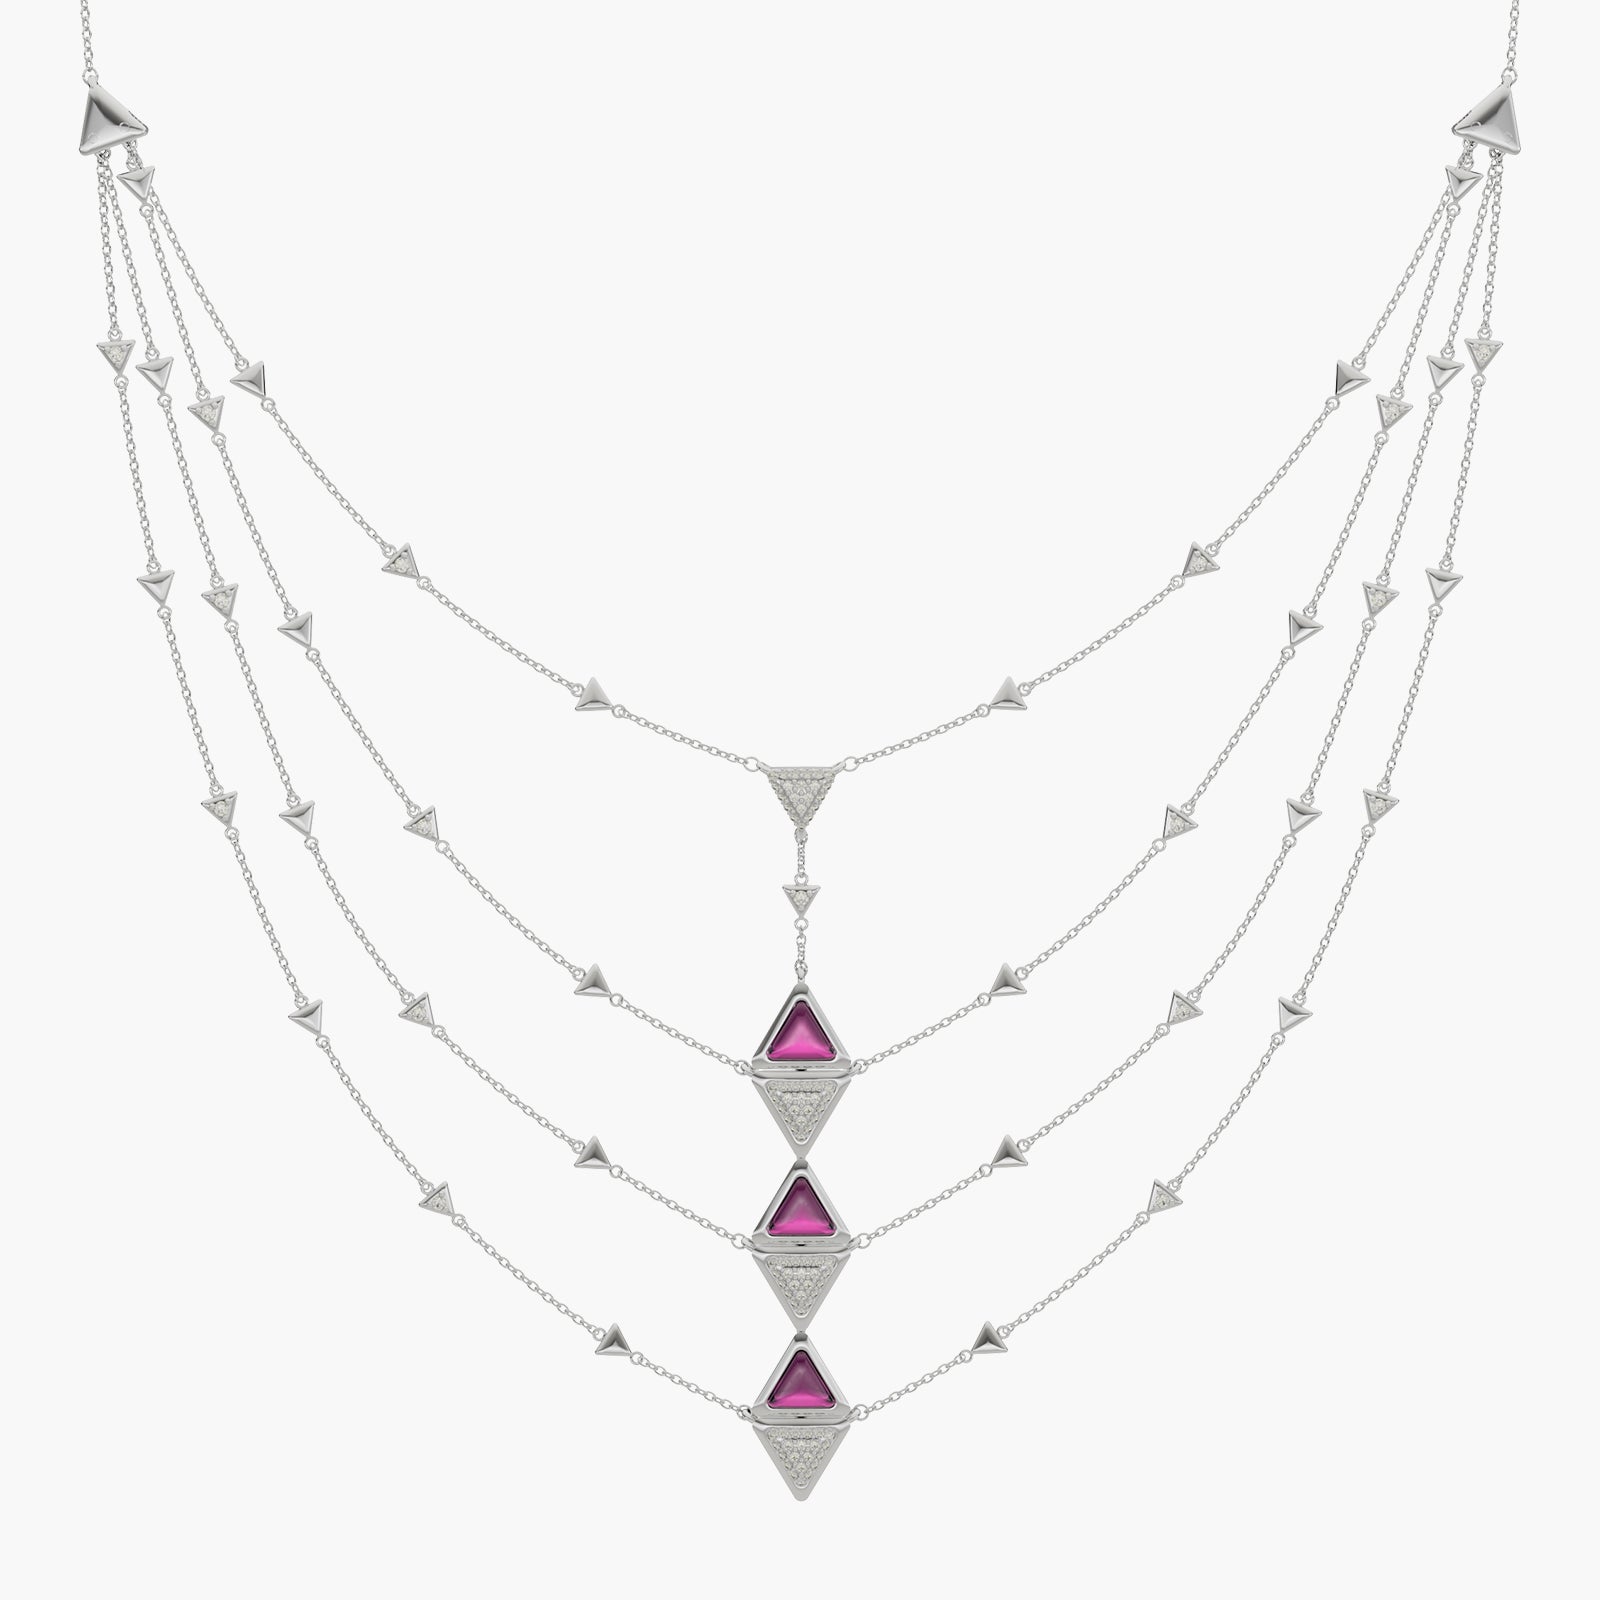 Necklace Multi Mirror Exquisite White Gold Pink Garnet and Diamonds